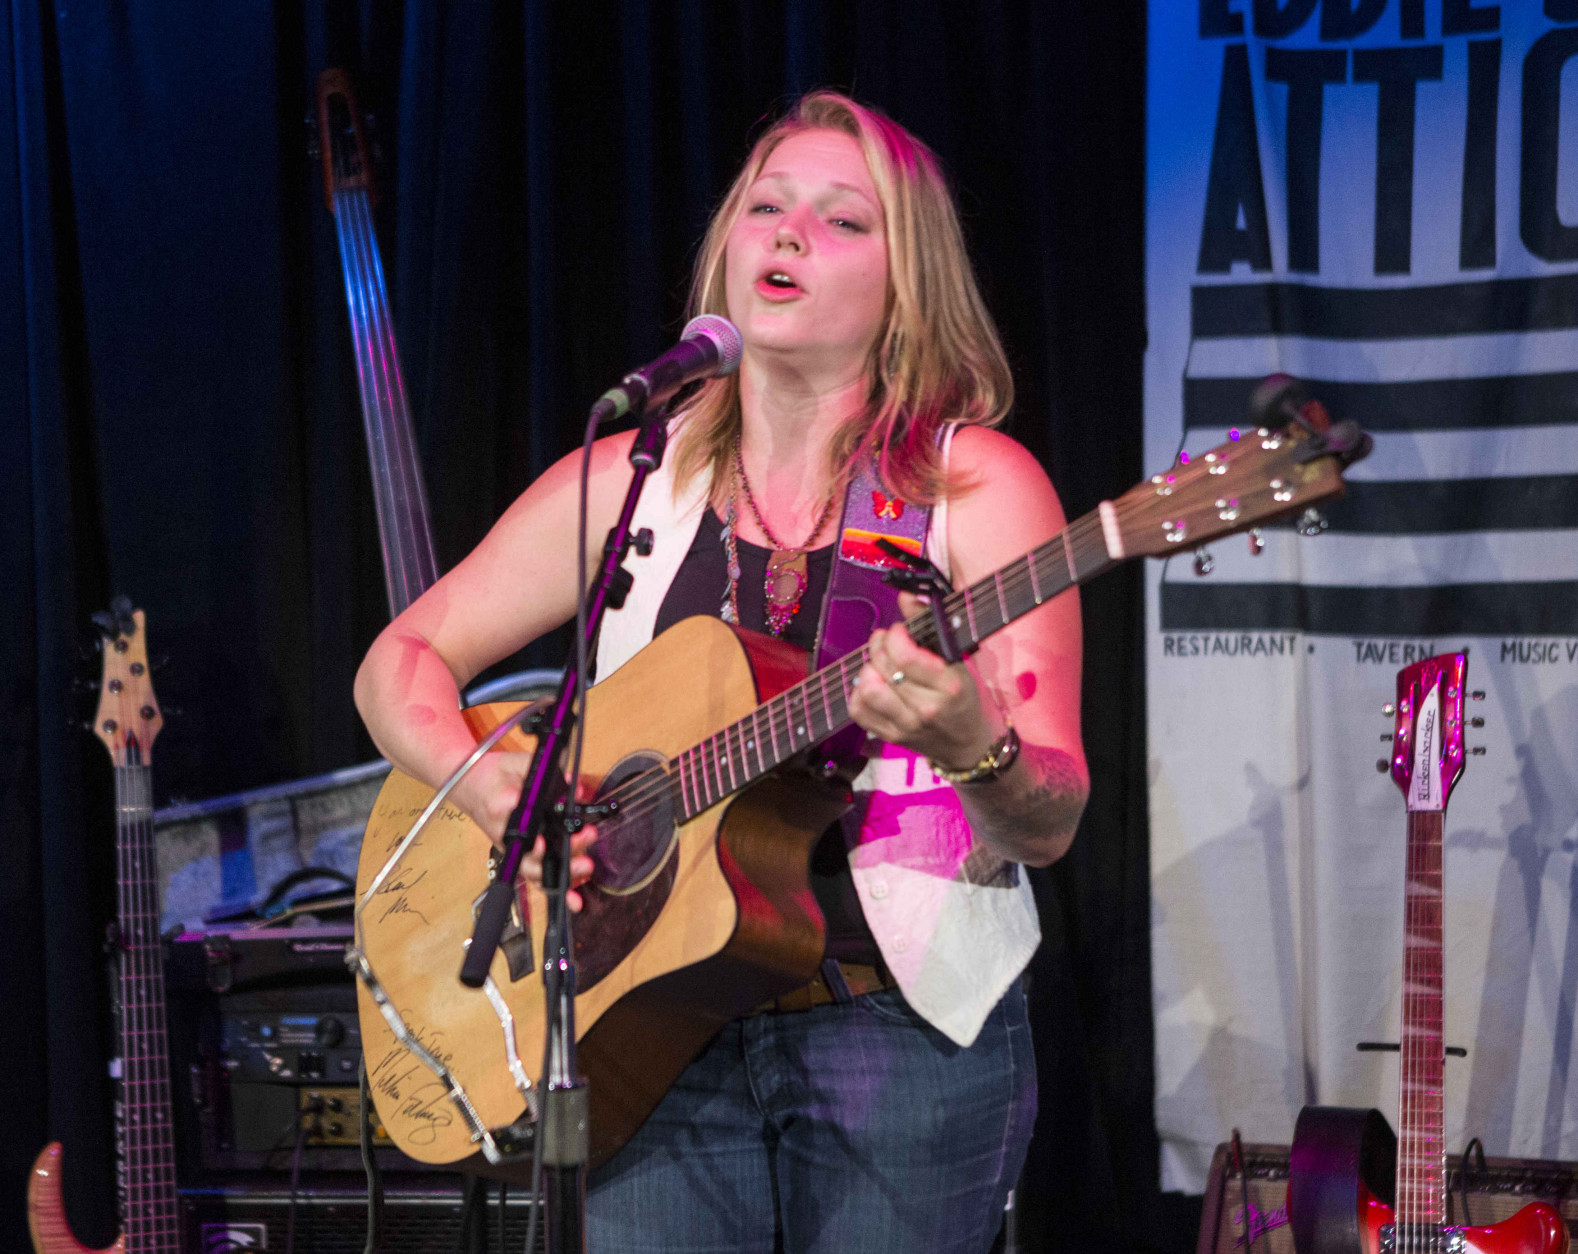 "American Idol'' runner-up Crystal Bowersox is 30 on Aug. 4. Here, Bowersox performs at Eddie's Attic on Tuesday, July 28, 2015, in Atlanta. (Photo by Robb D. Cohen/Invision/AP)